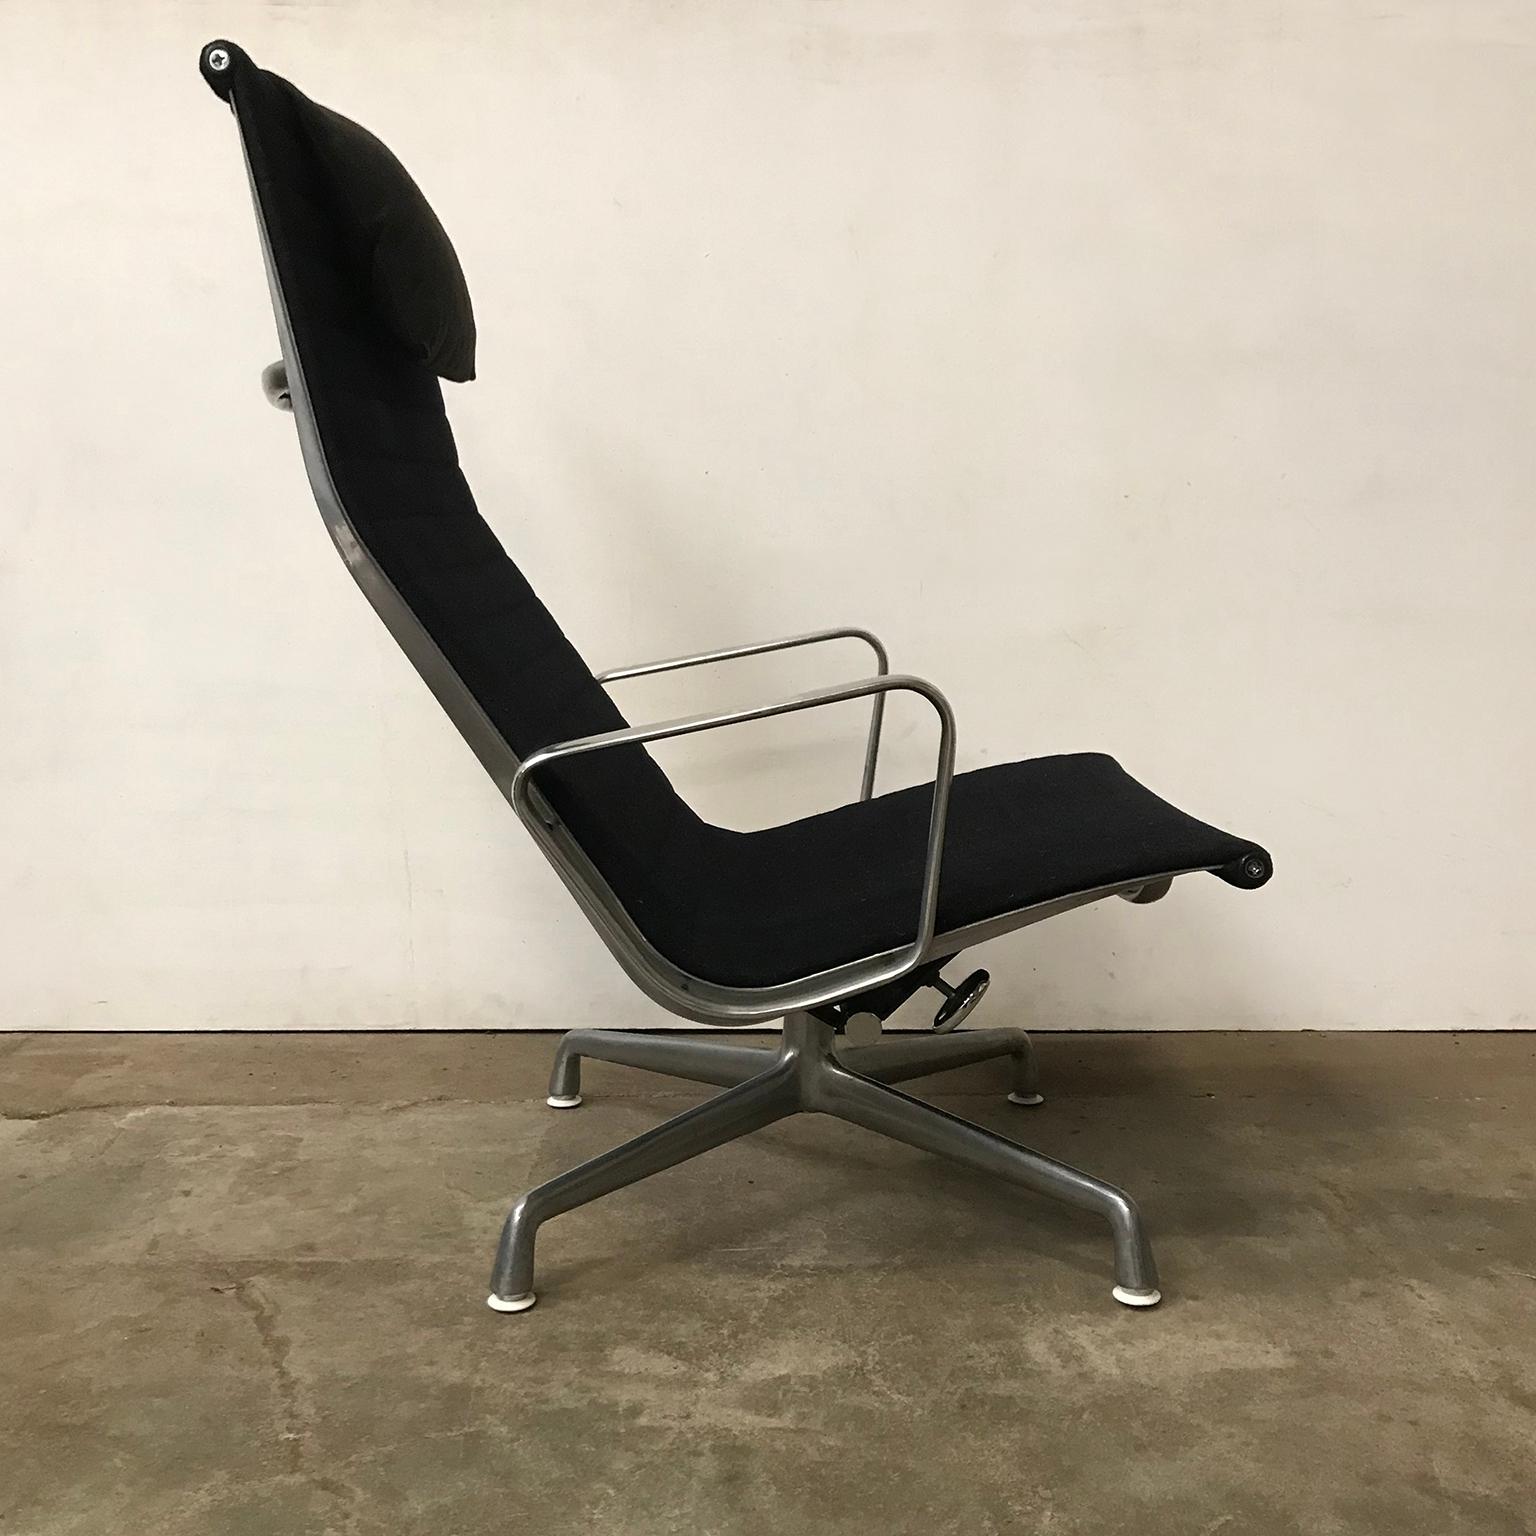 Black EA 124 with dark grey head cushion with glossy base by Herman Miller. This beautiful piece is still in a good condition, although there are some traces of wear like the glossy base became less glossy (pictures #14 and #15) and some loss of the